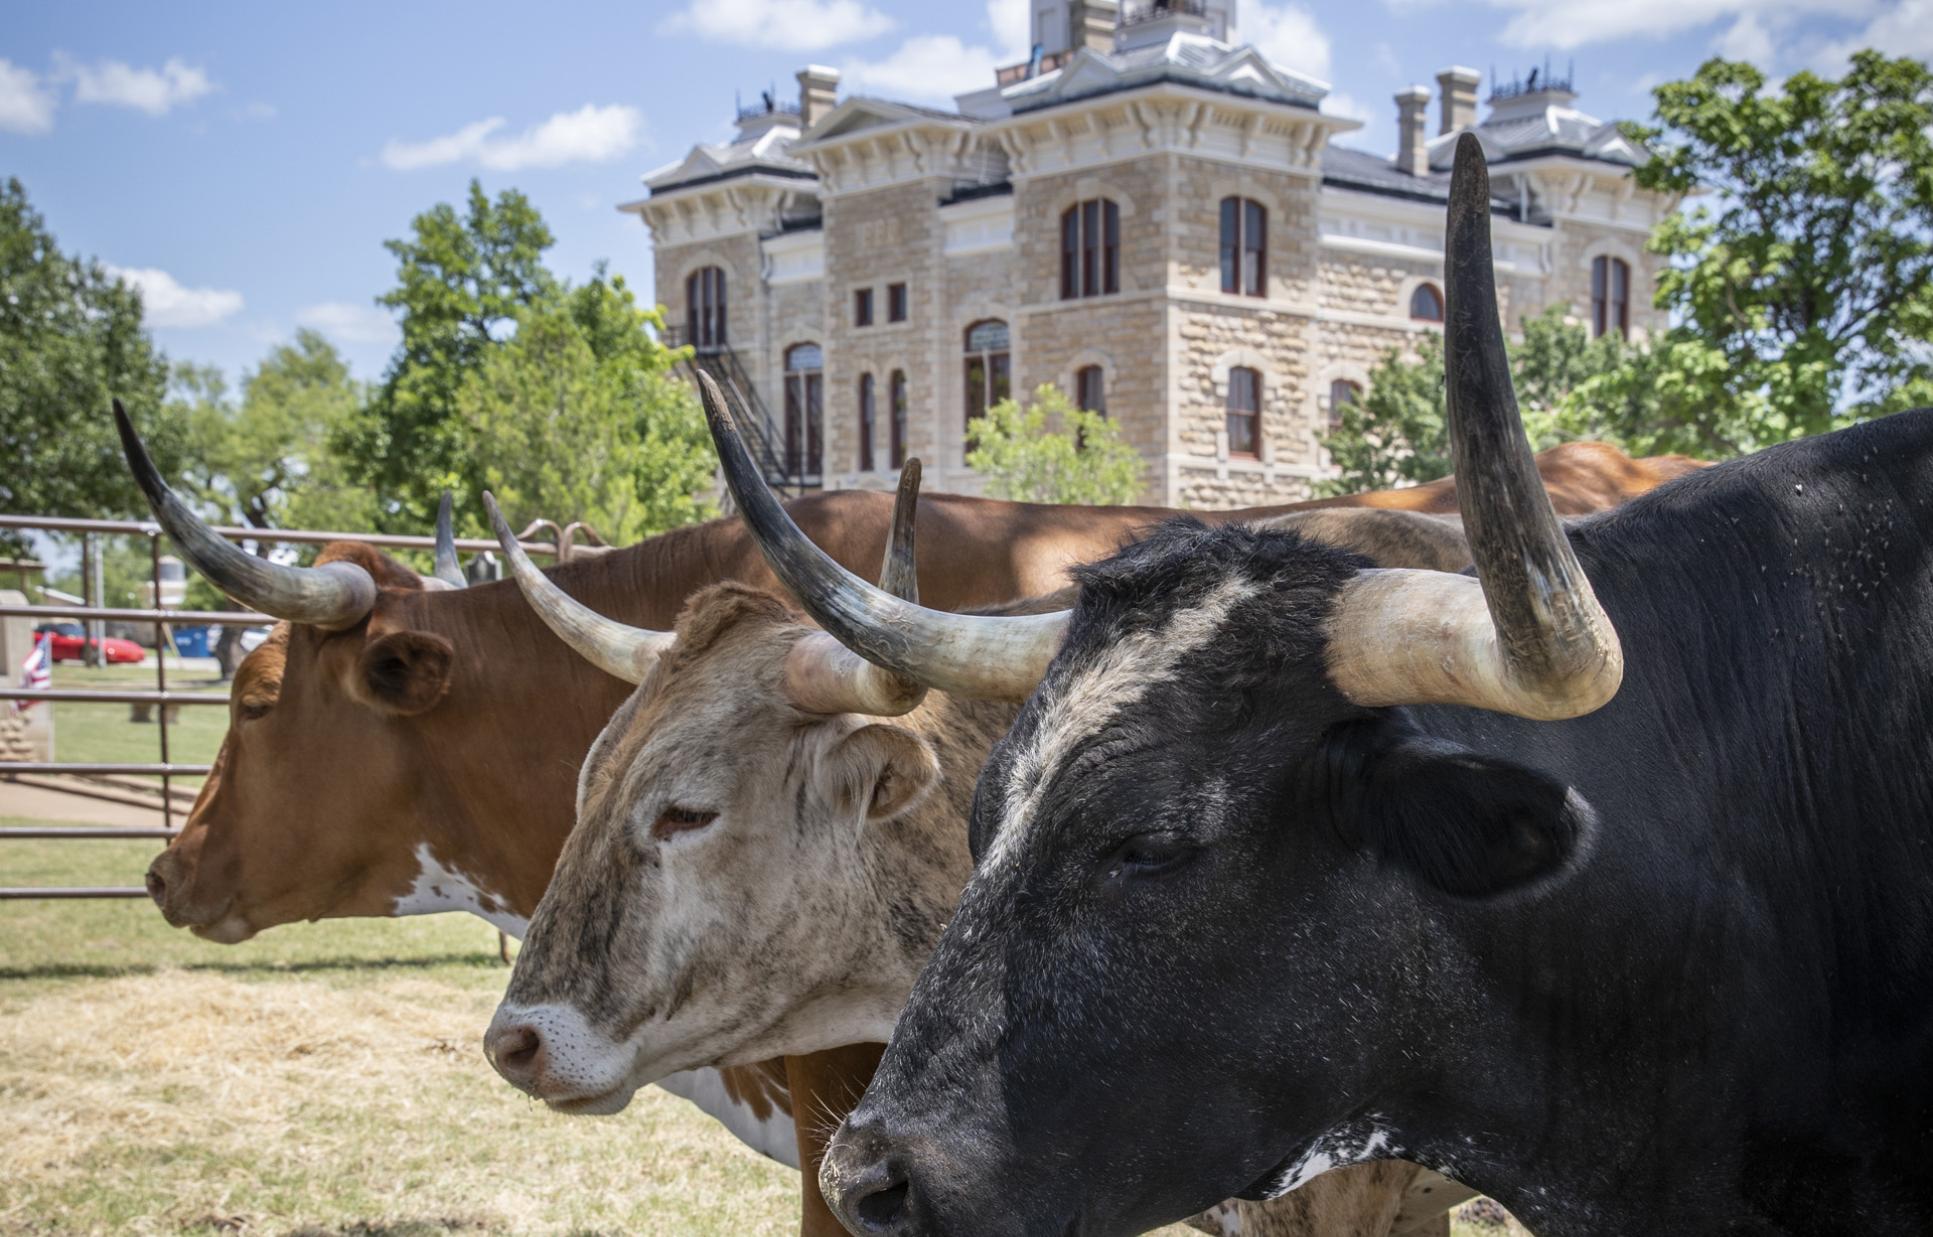 Longhorns at Shackleford County Courthouse